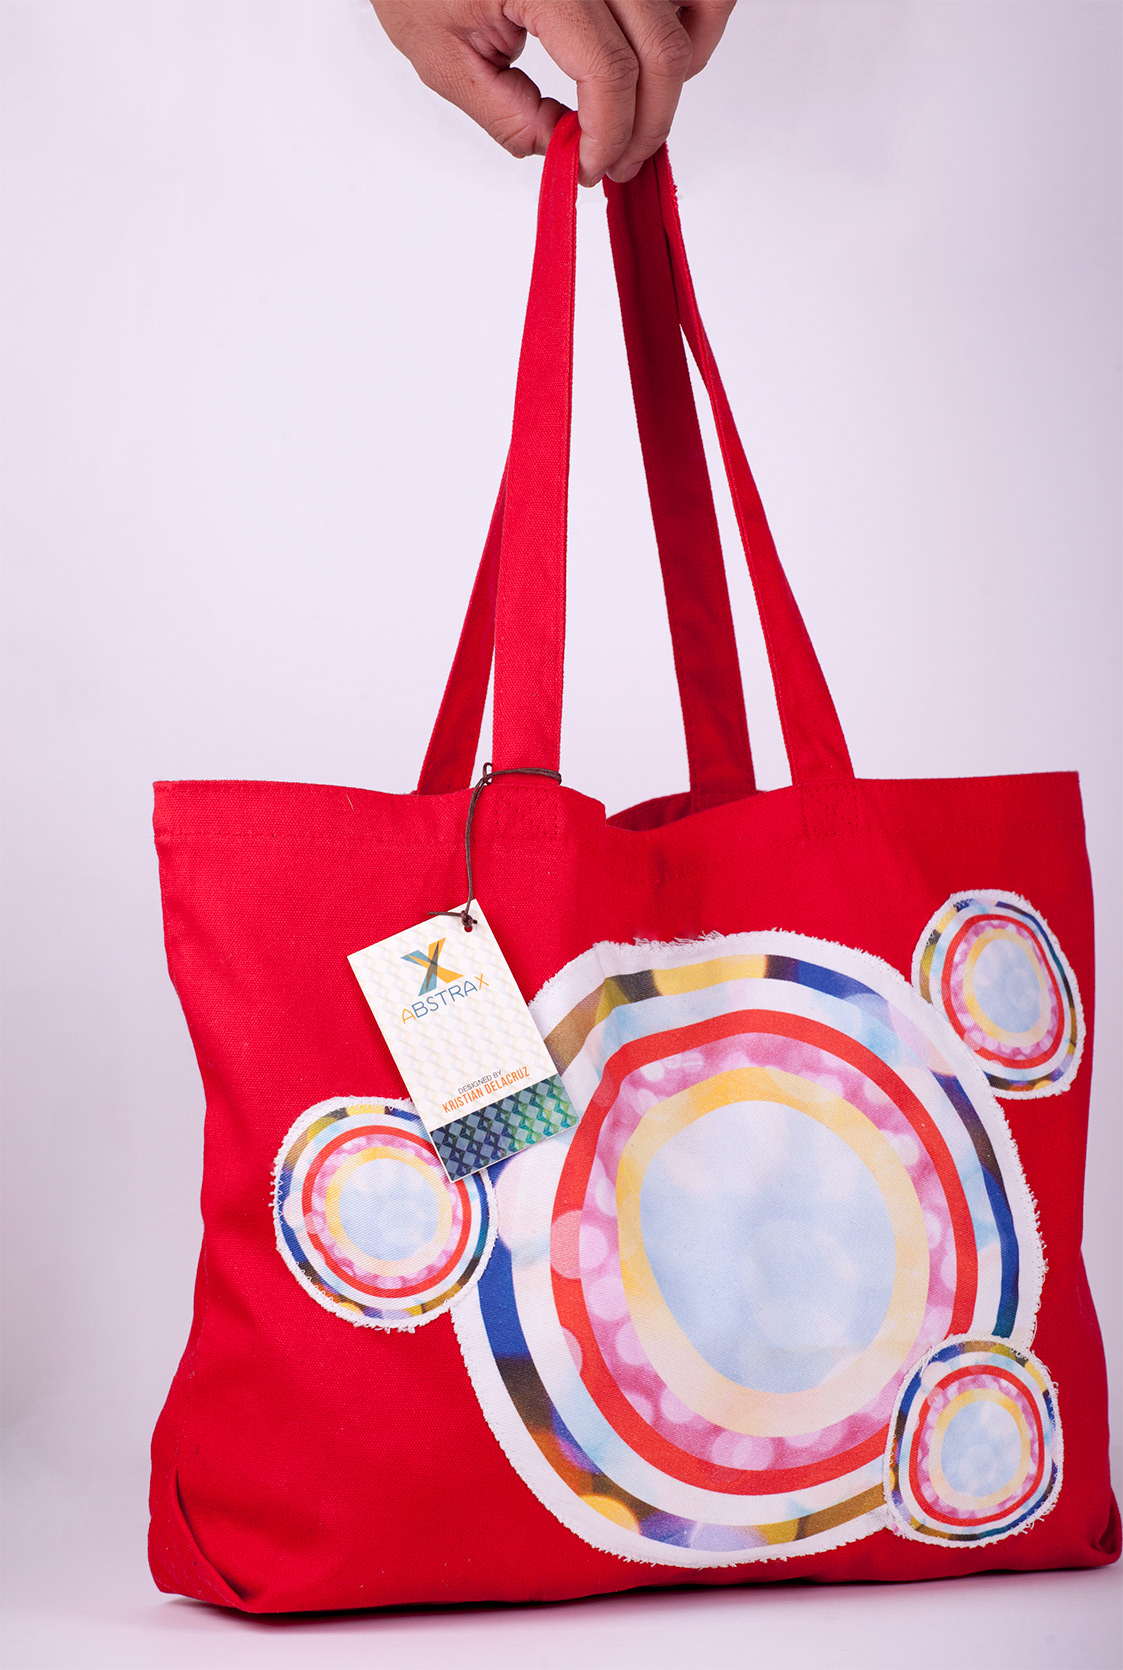 Tote Bags DIY projects Tote bags graphics abstract conceptual dreams company building etsy